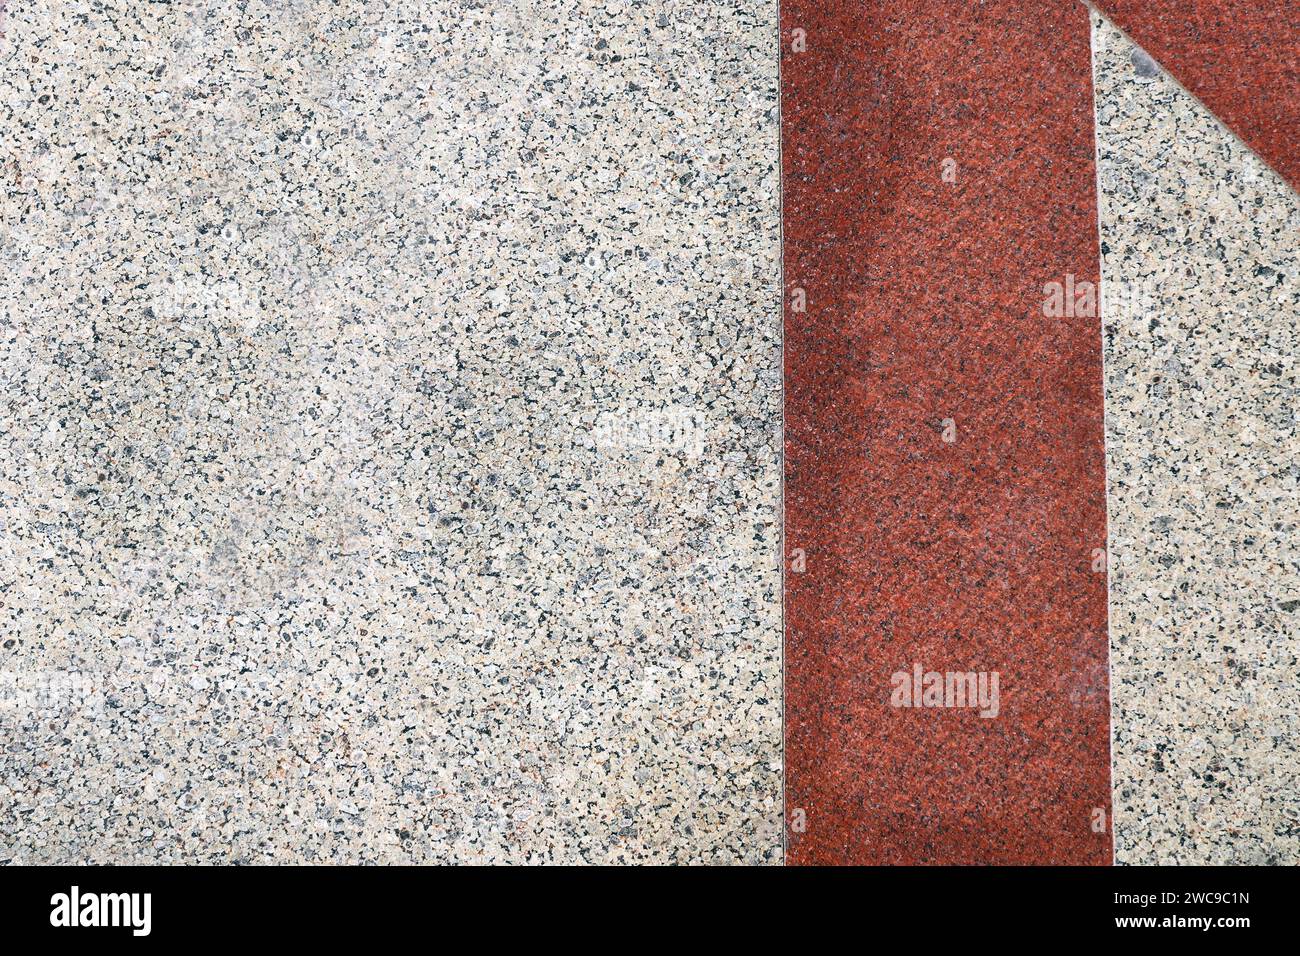 Horizontal or vertical background with natural granite tiles floor. Granite texture backdrop with vintage rhomboidal tile of red and gray color. Polis Stock Photo